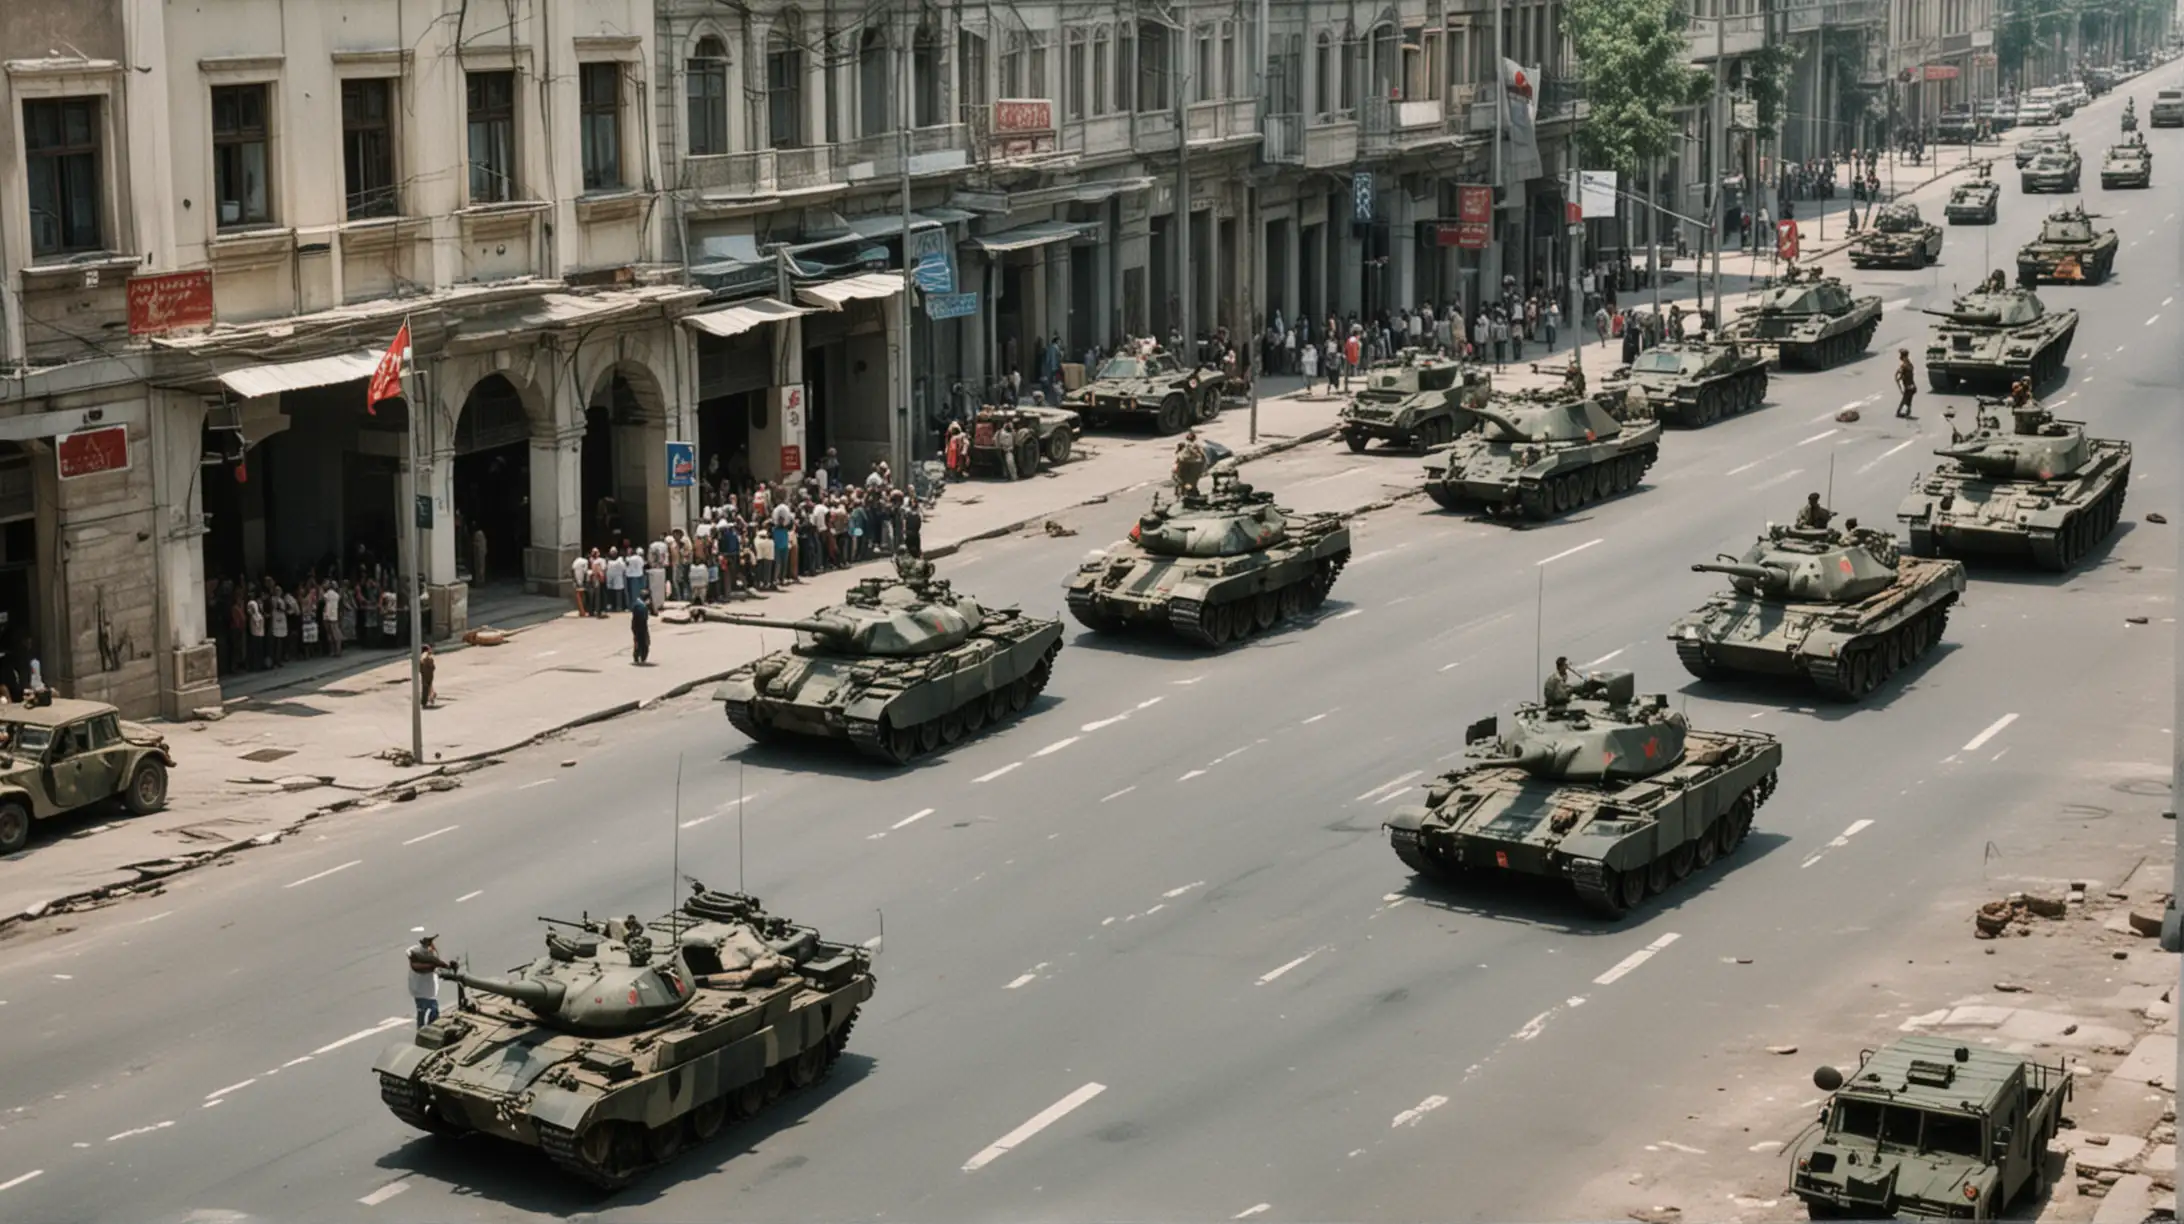 1991 Soviet Coup Tanks and Military Vehicles on the Streets